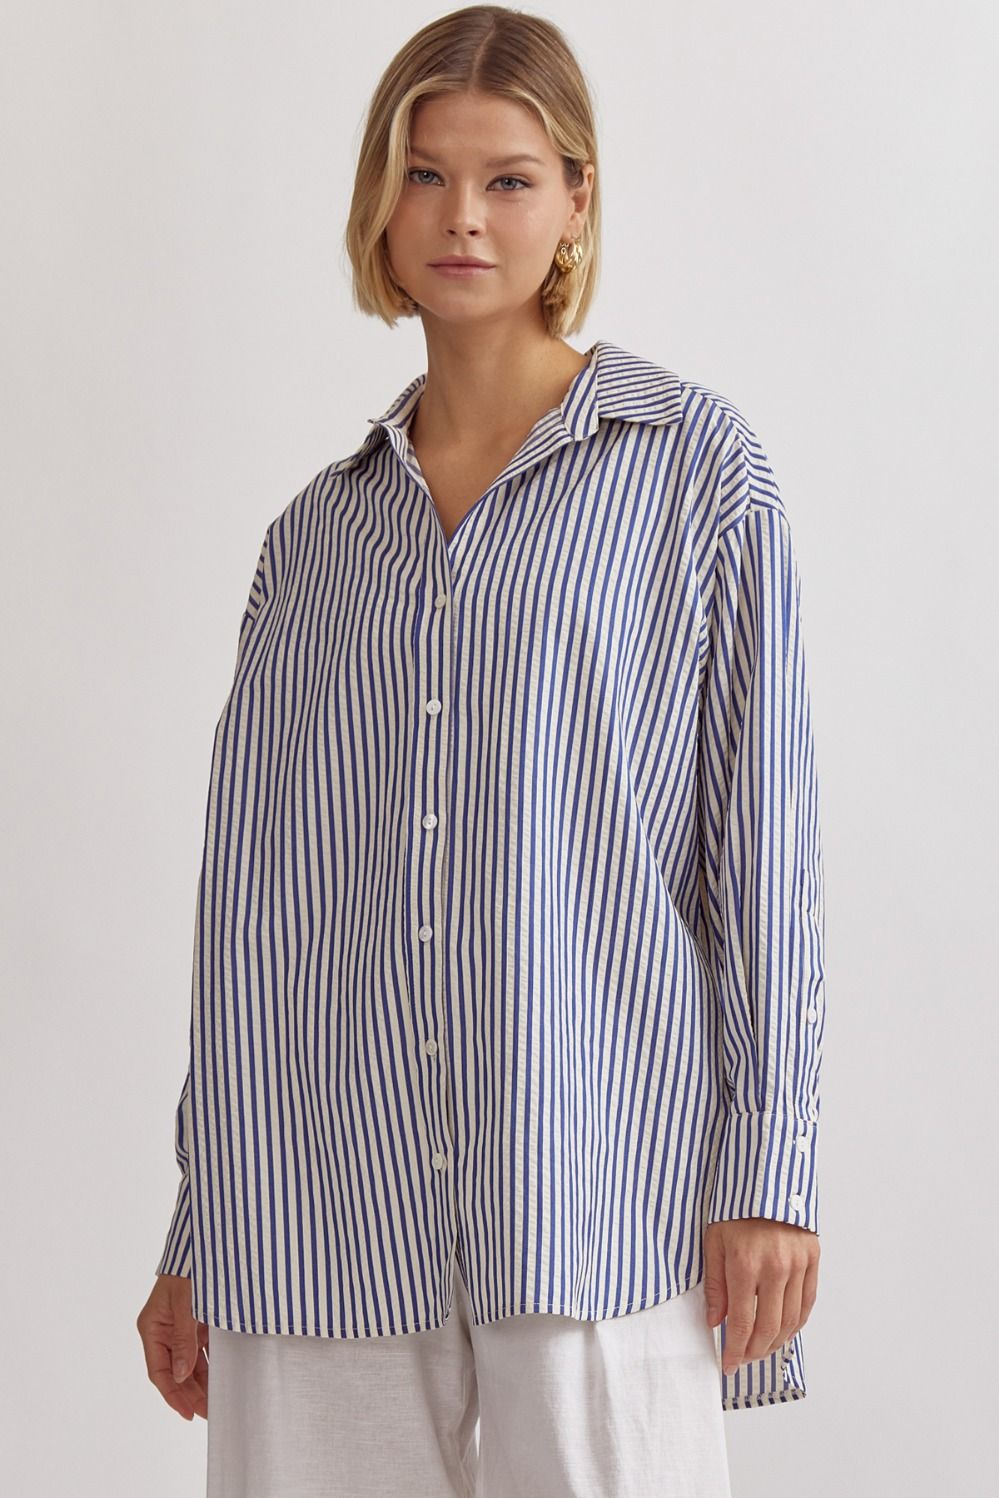 Entro | Blue Striped Button Down for Women | Sweetest Stitch Online